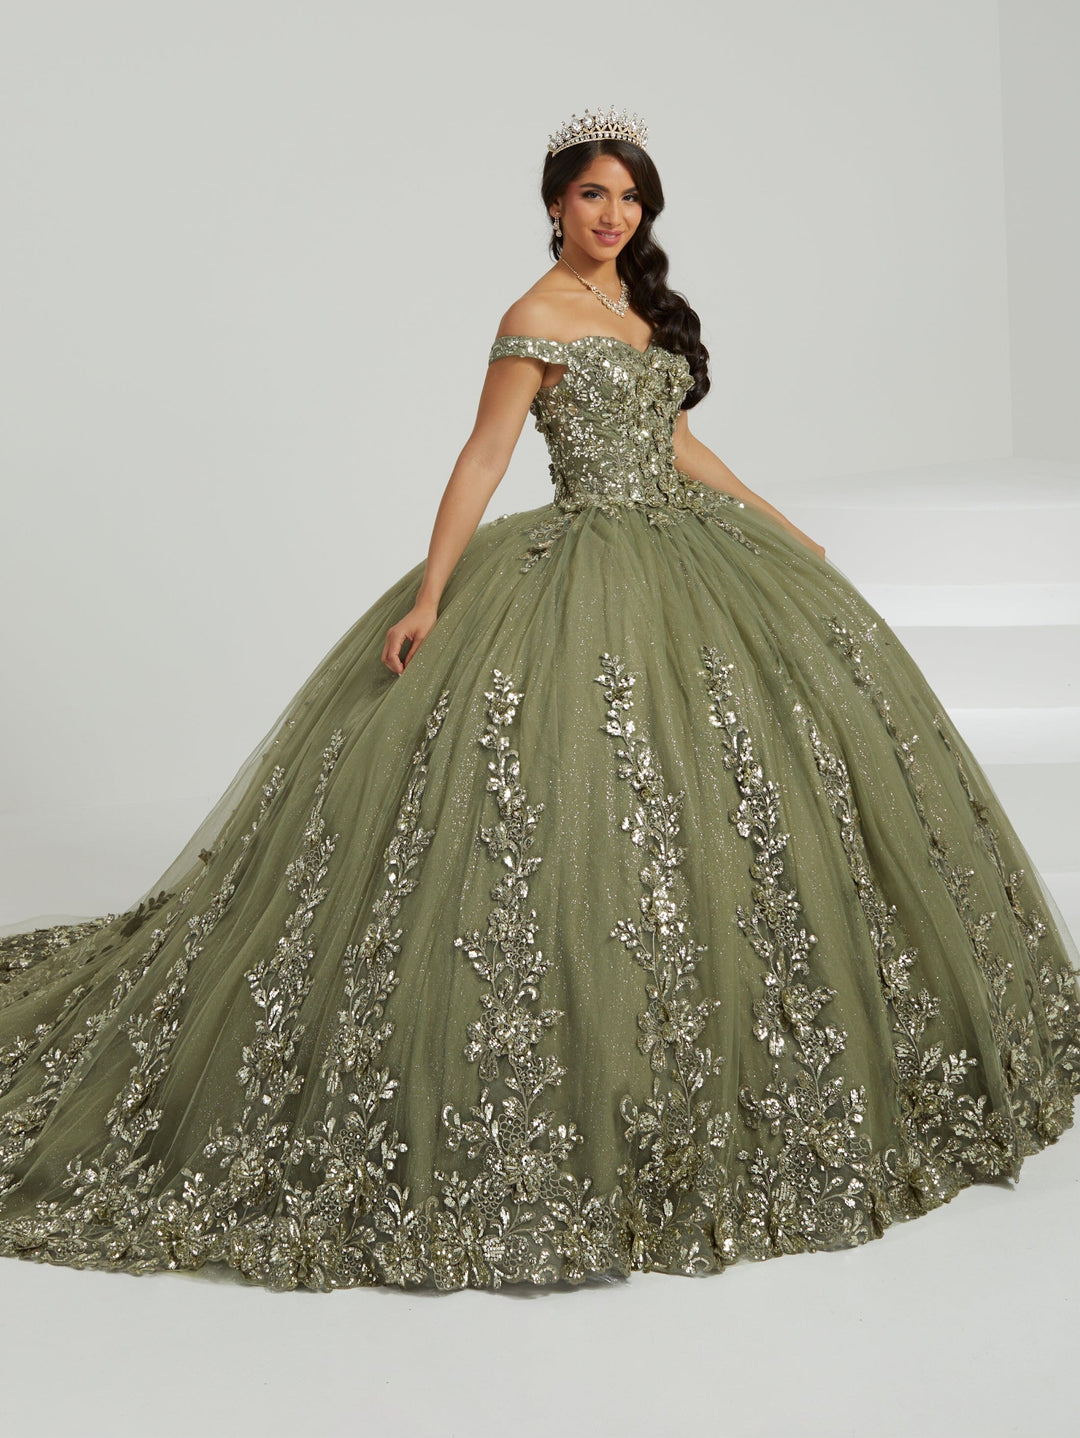 Floral Off Shoulder Quinceanera Dress by Fiesta Gowns 56484